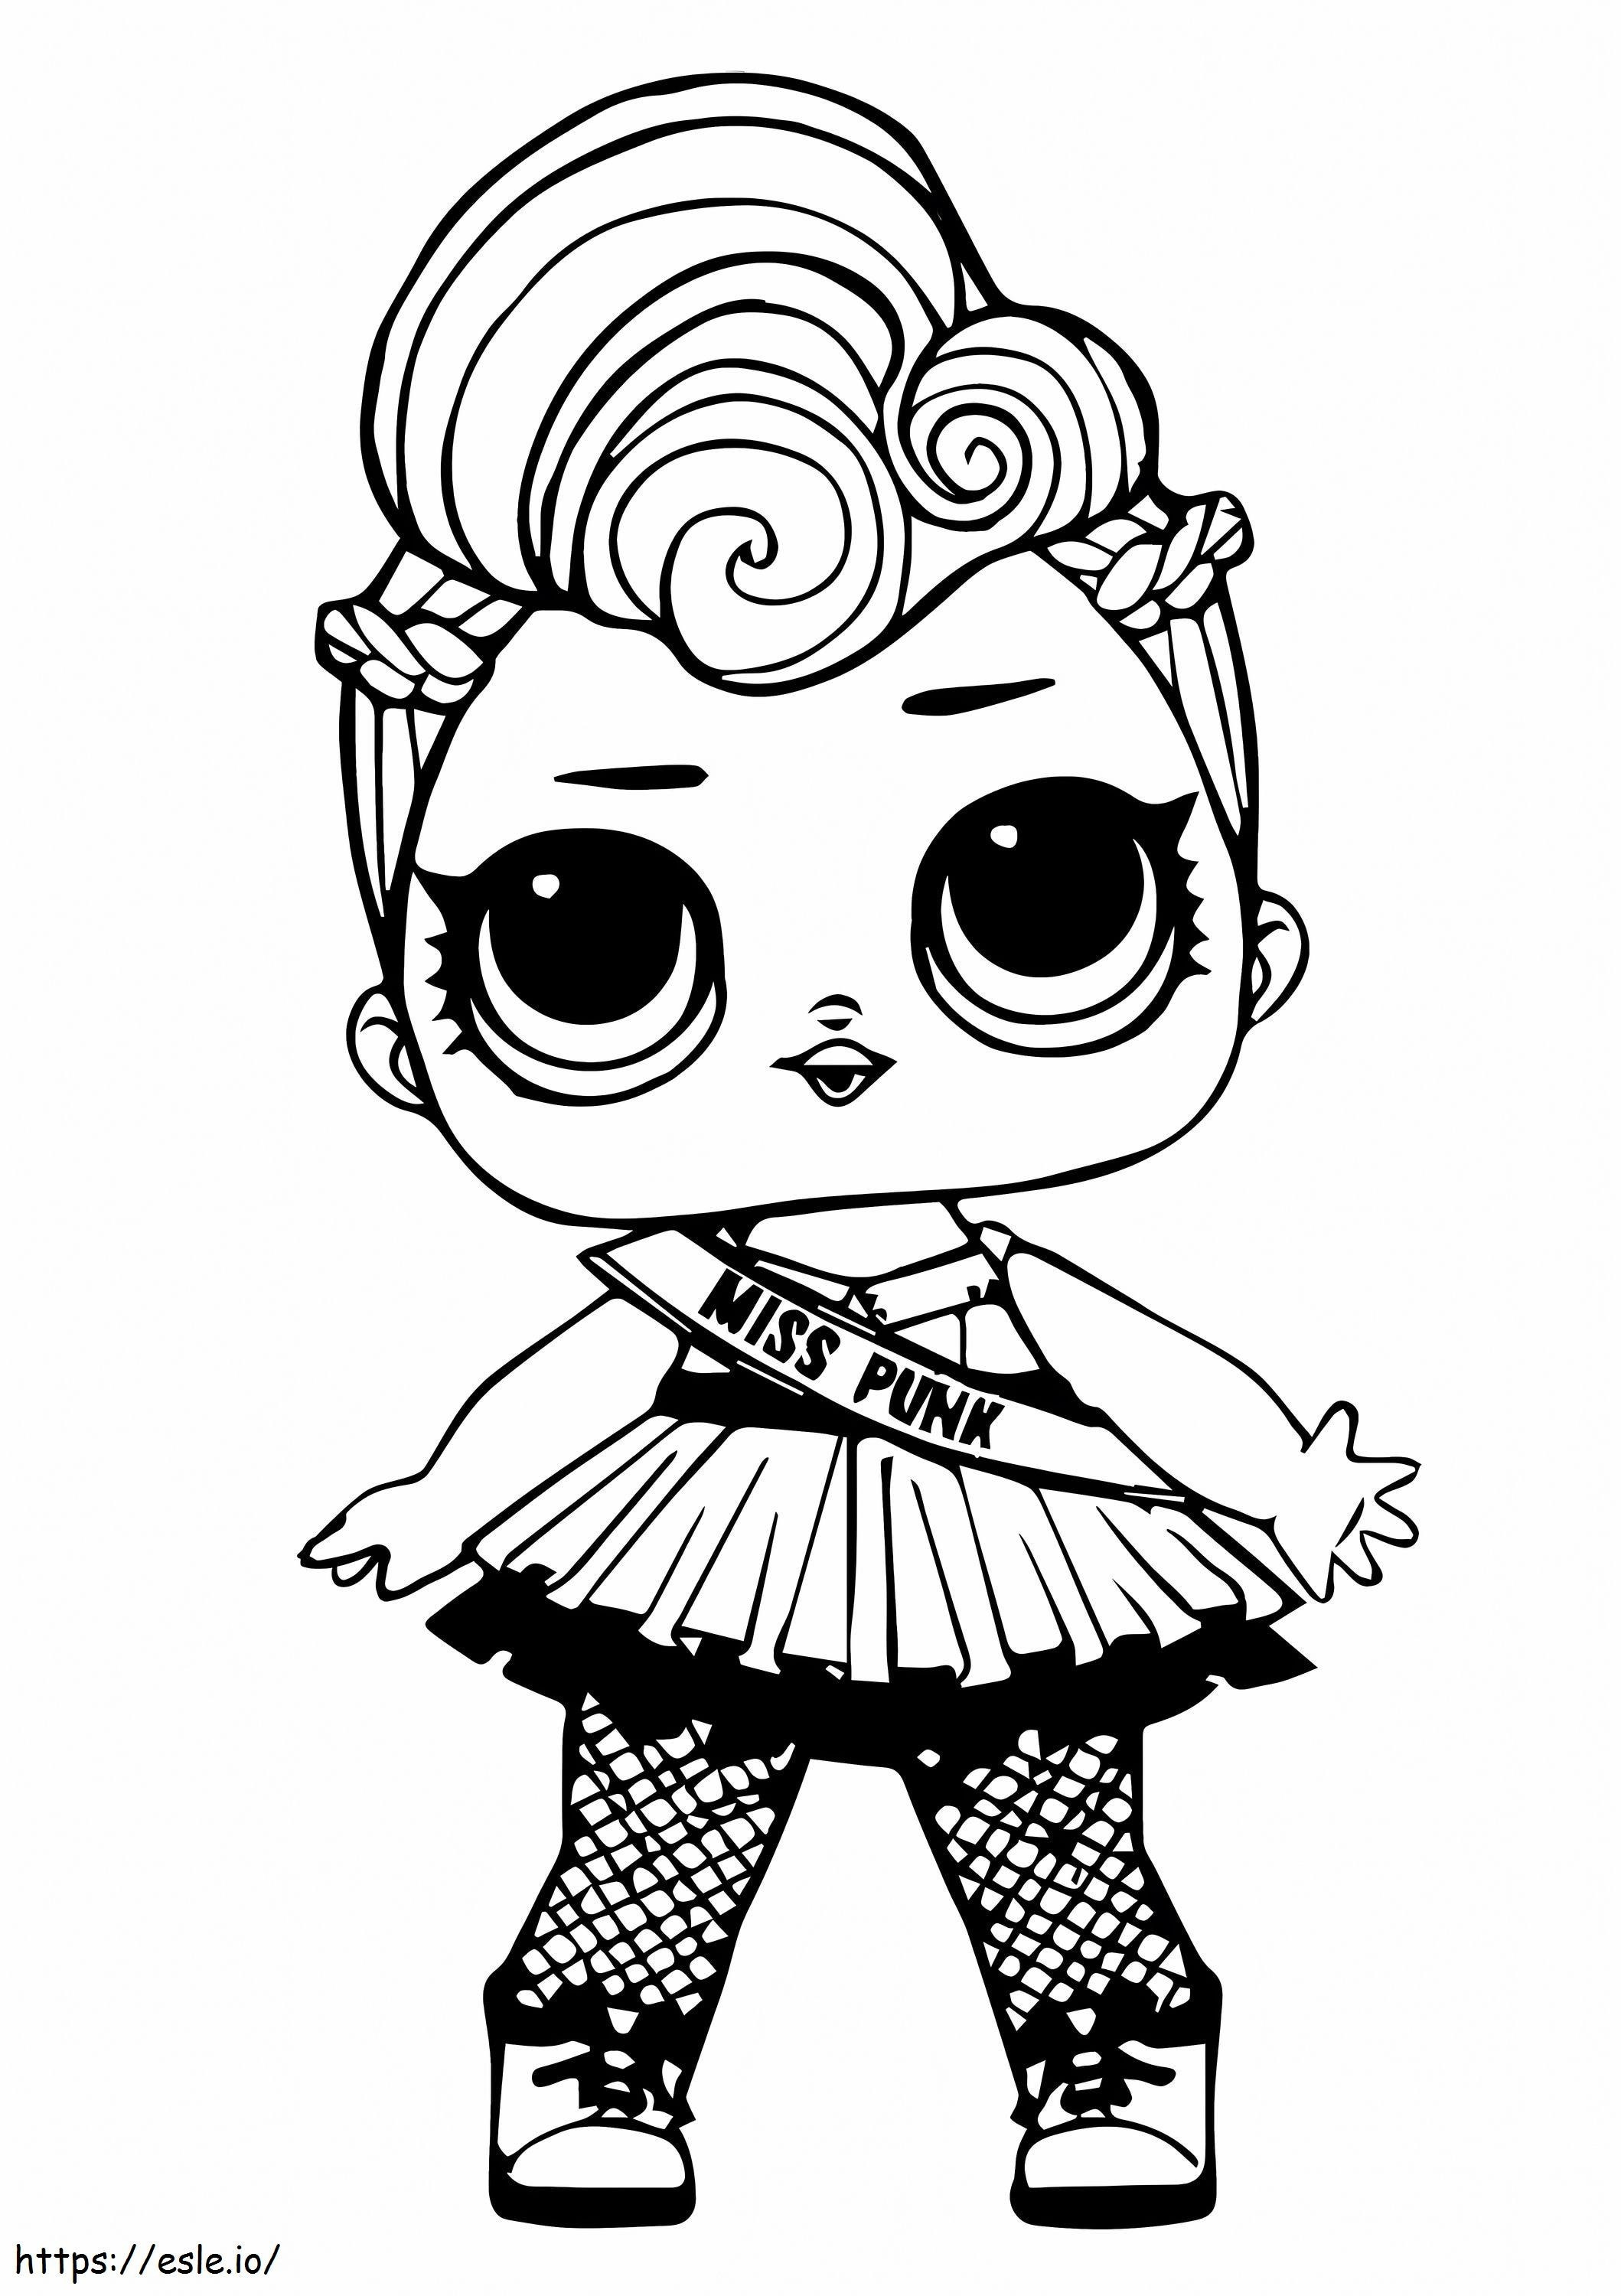 1572656341 Lol Doll Miss Punk coloring page